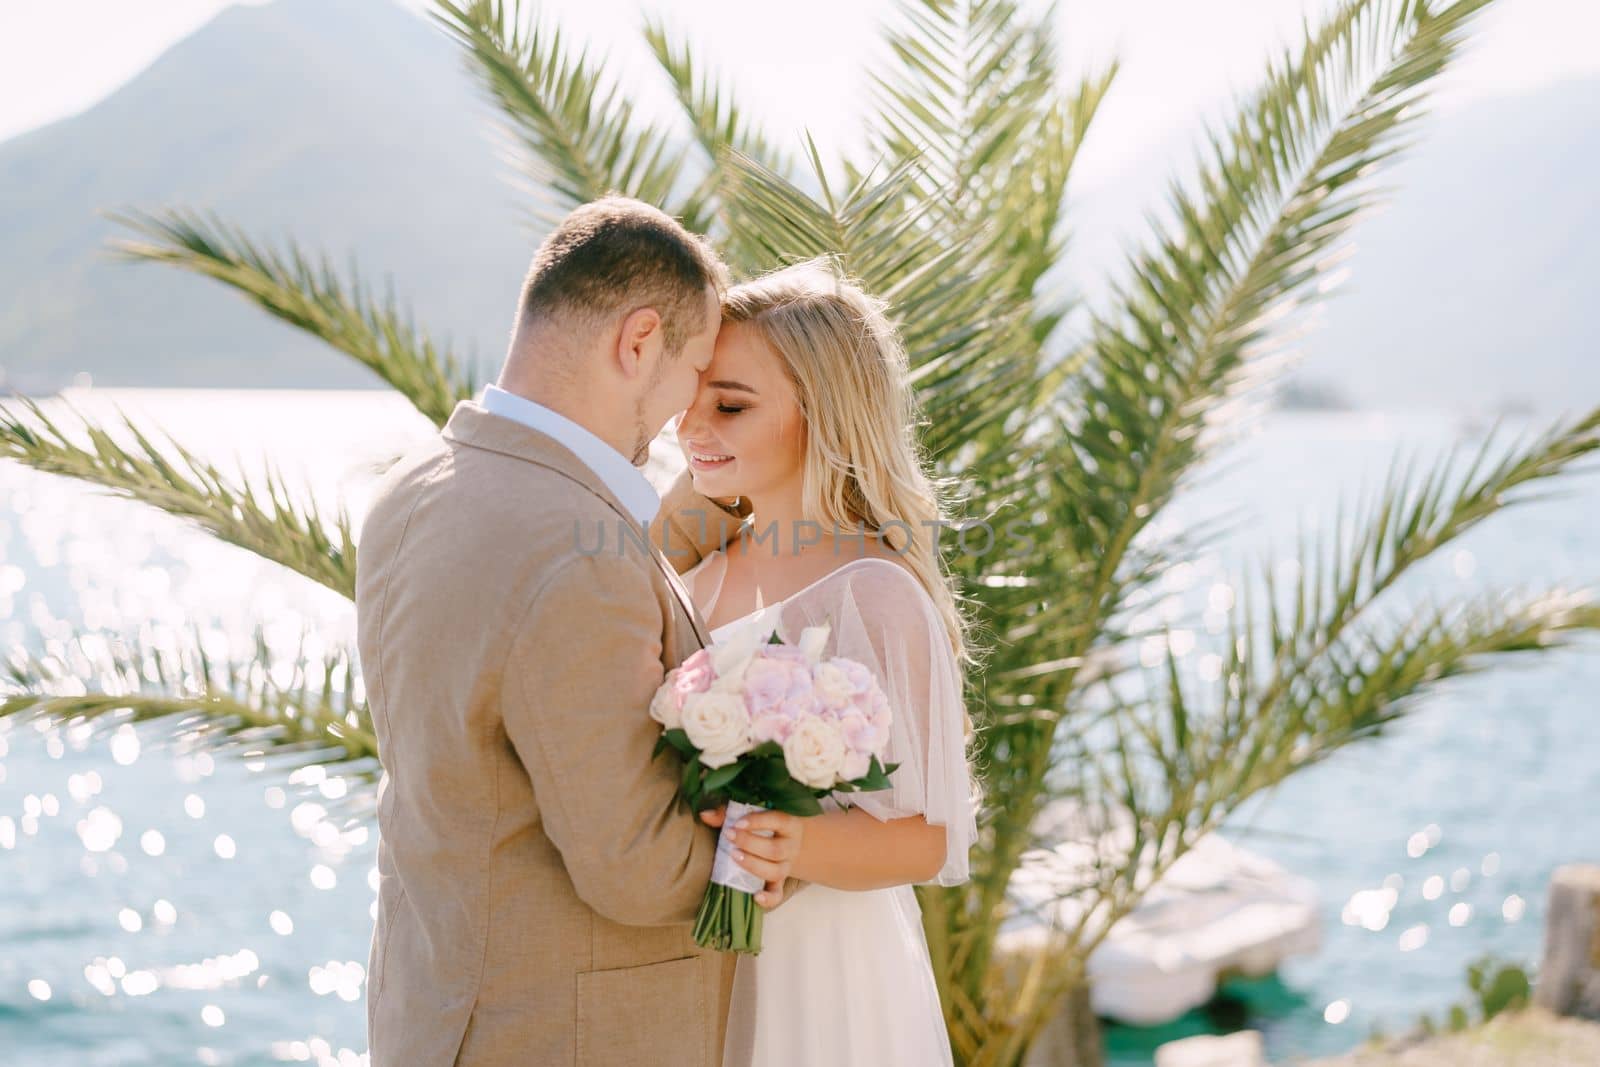 The groom and the smiling bride with a bouquet stand on the pier at the background of a palm tree and tenderly hug by Nadtochiy